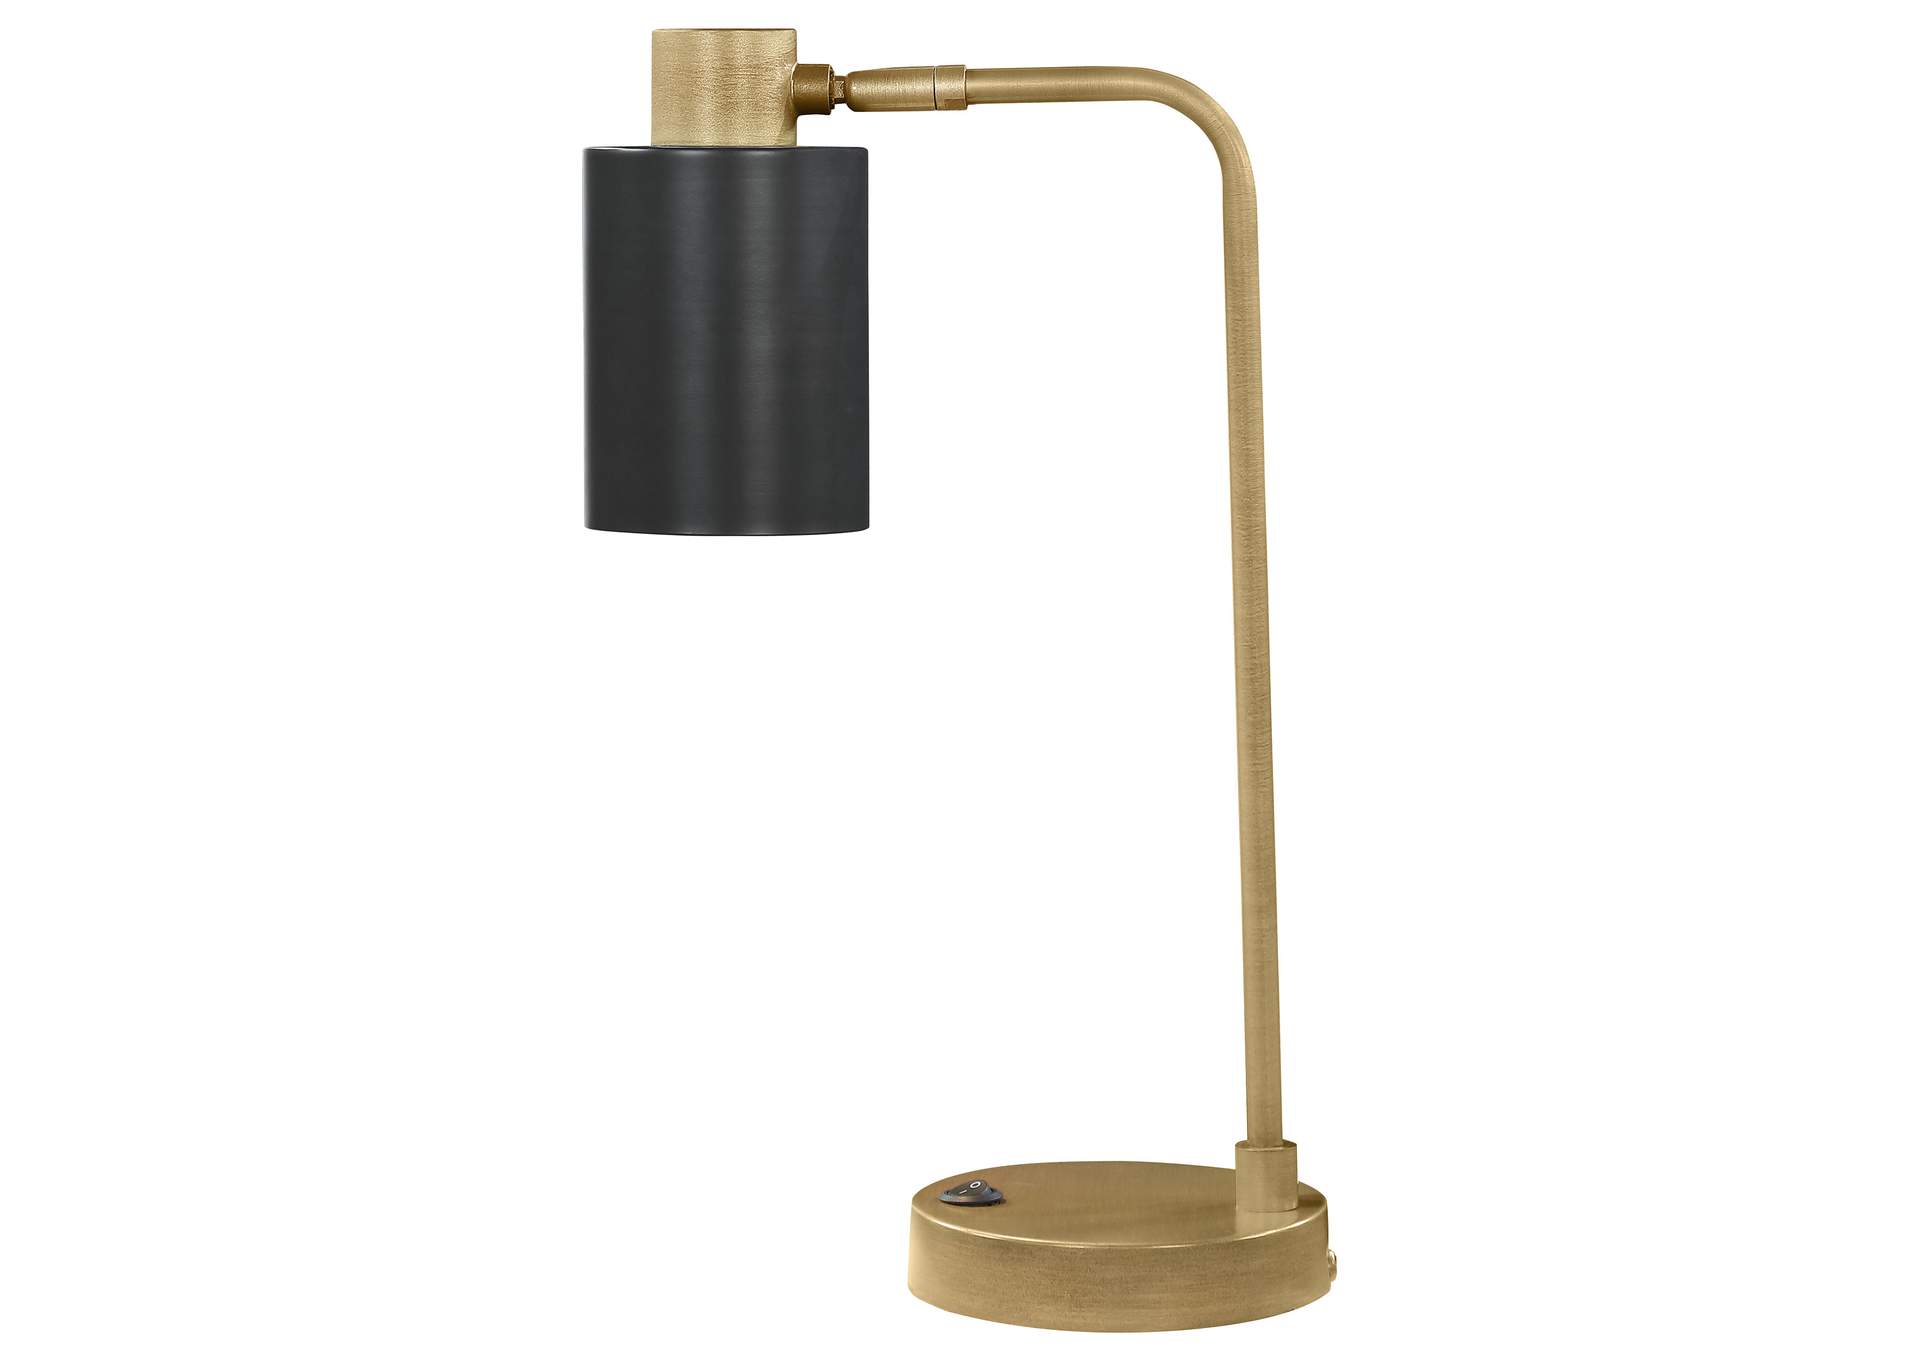 Cherise Adjustable Shade Table Lamp Antique Brass and Matte Black,Coaster Furniture